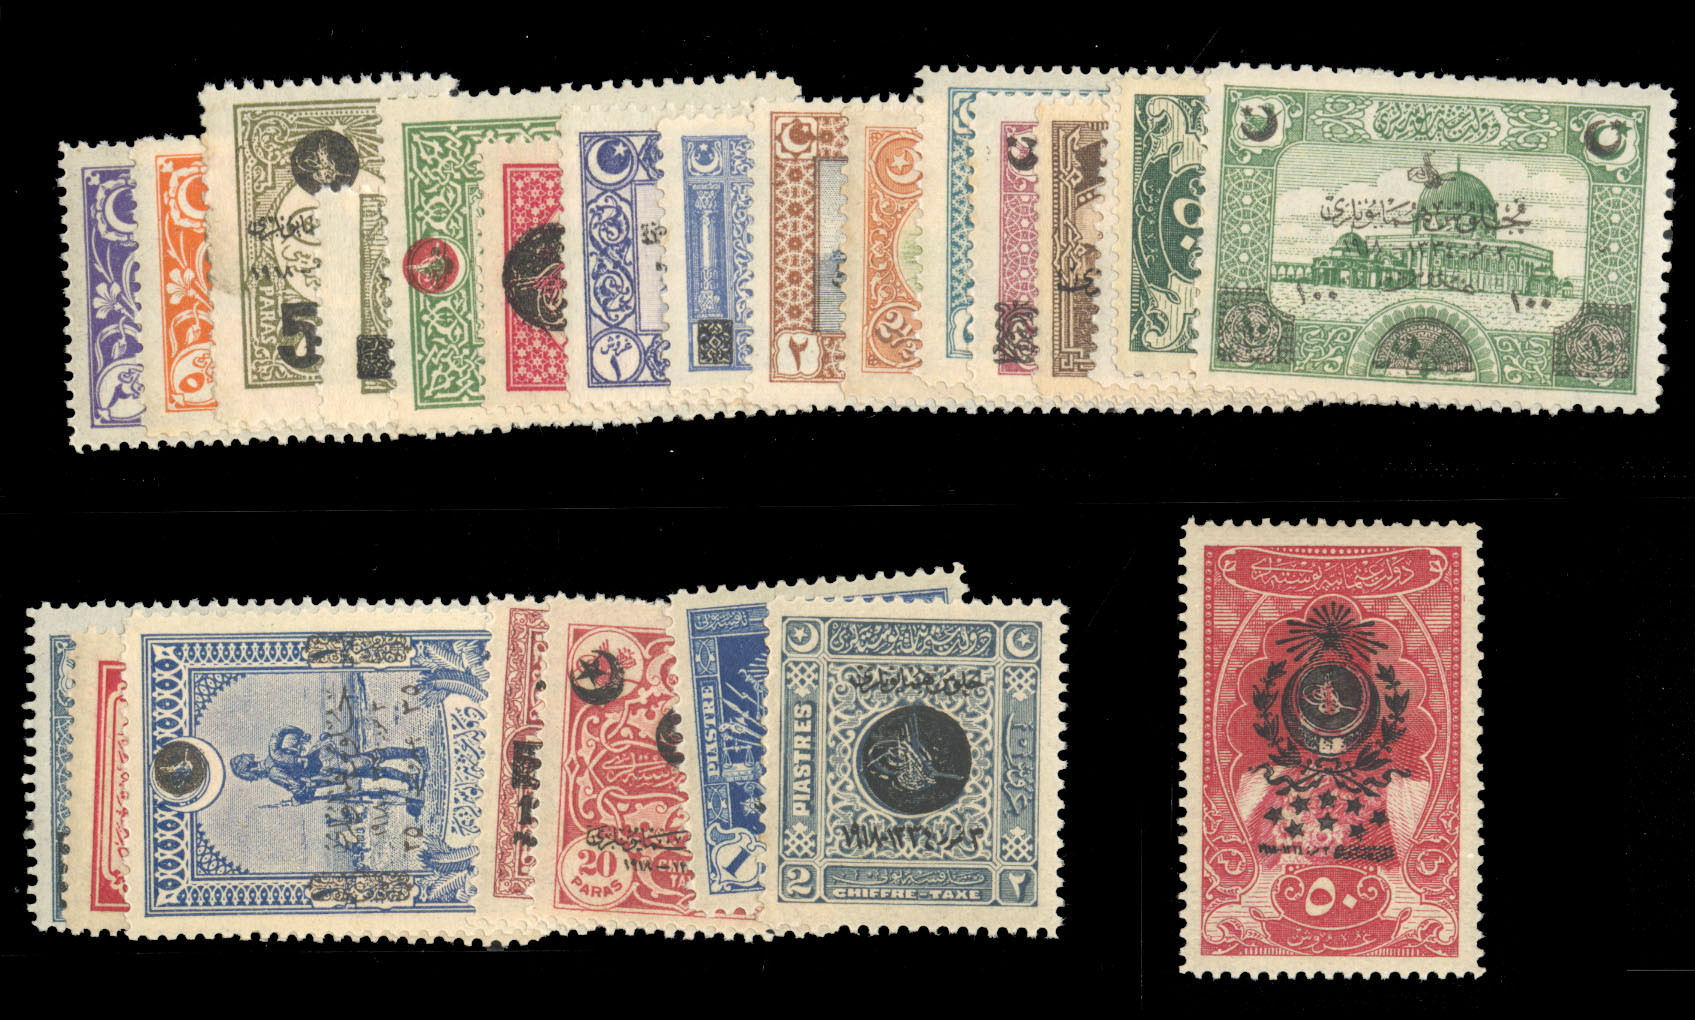 Lot 1343 - LARGE LOTS AND COLLECTIONS UNITED STATES Local Issues  -  Cherrystone Auctions U.S. & Worldwide Stamps & Postal History